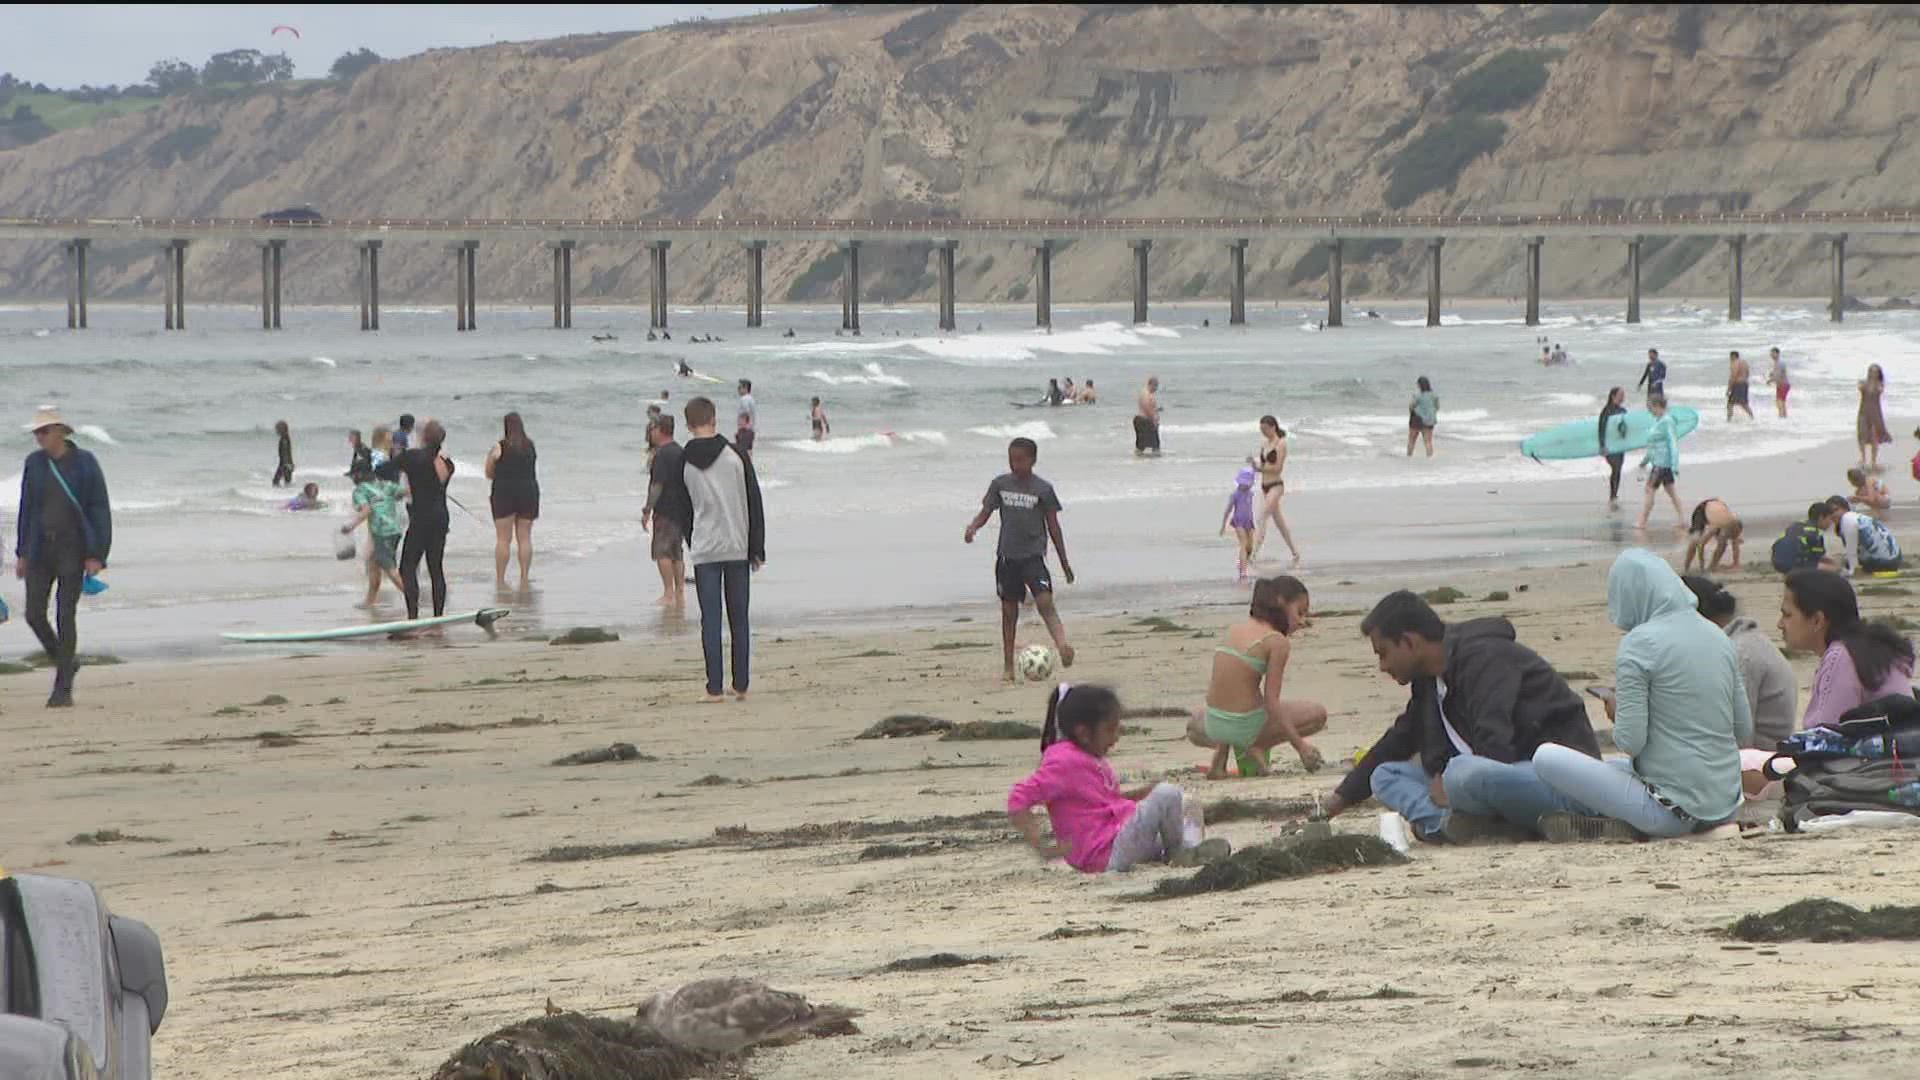 As COVID-19 cases in San Diego County continue to creep up, there is growing concern that large crowds could spread the virus over the holiday weekend.